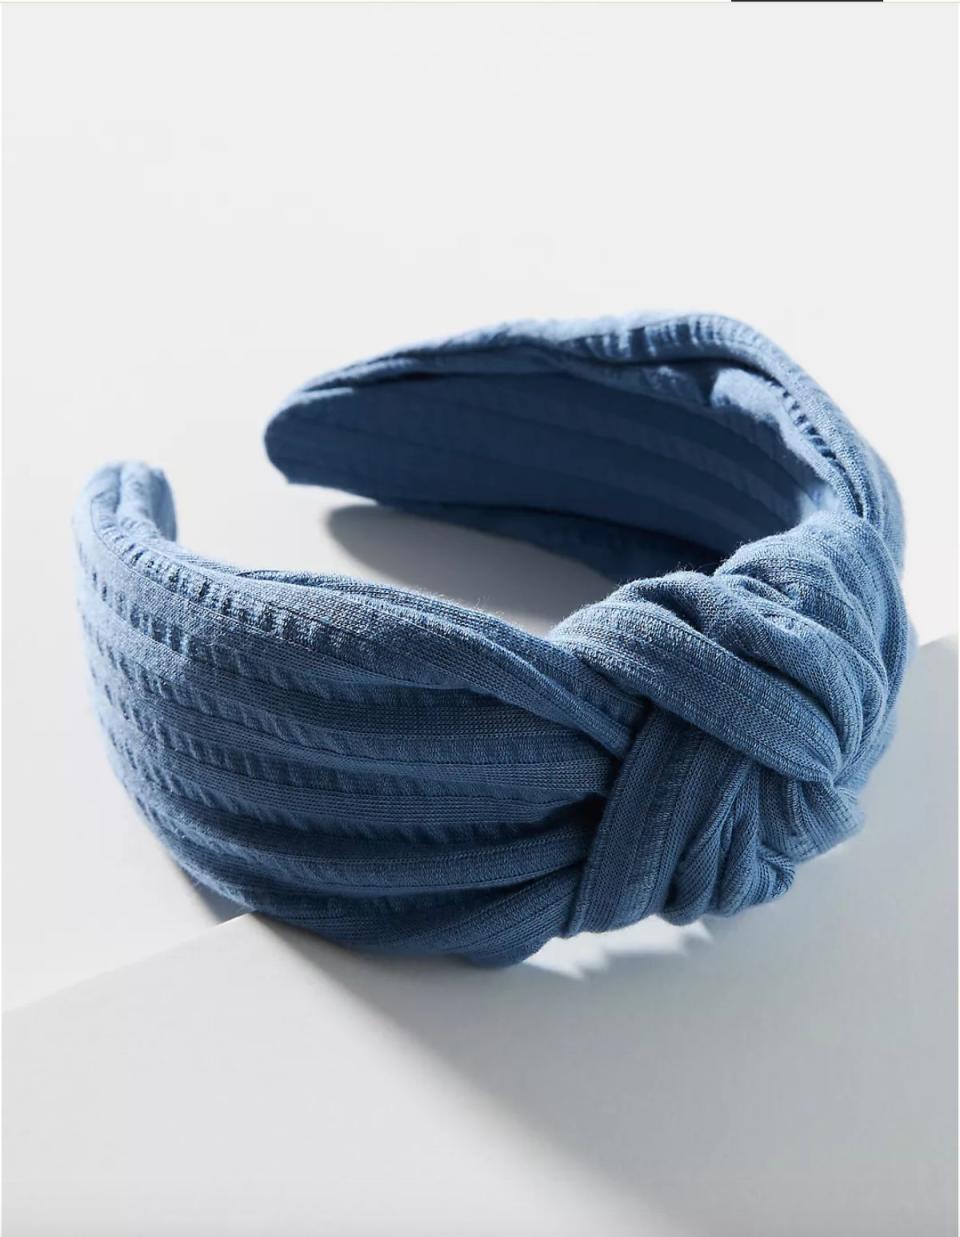 Get <a href="https://www.anthropologie.com/shop/angela-knotted-headband?color=043&amp;size=One%20Size&amp;inventoryCountry=US&amp;countryCode=US&amp;gclid=Cj0KCQiA962BBhCzARIsAIpWEL0TmQltlozBWS1eapdZsOlmzOo24zP1BQT-maElLQ26b0XW5zYi0UkaAhaaEALw_wcB&amp;gclsrc=aw.ds&amp;type=STANDARD&amp;quantity=1" target="_blank" rel="noopener noreferrer">the Anthropologie Angela knotted headband for $20</a>.